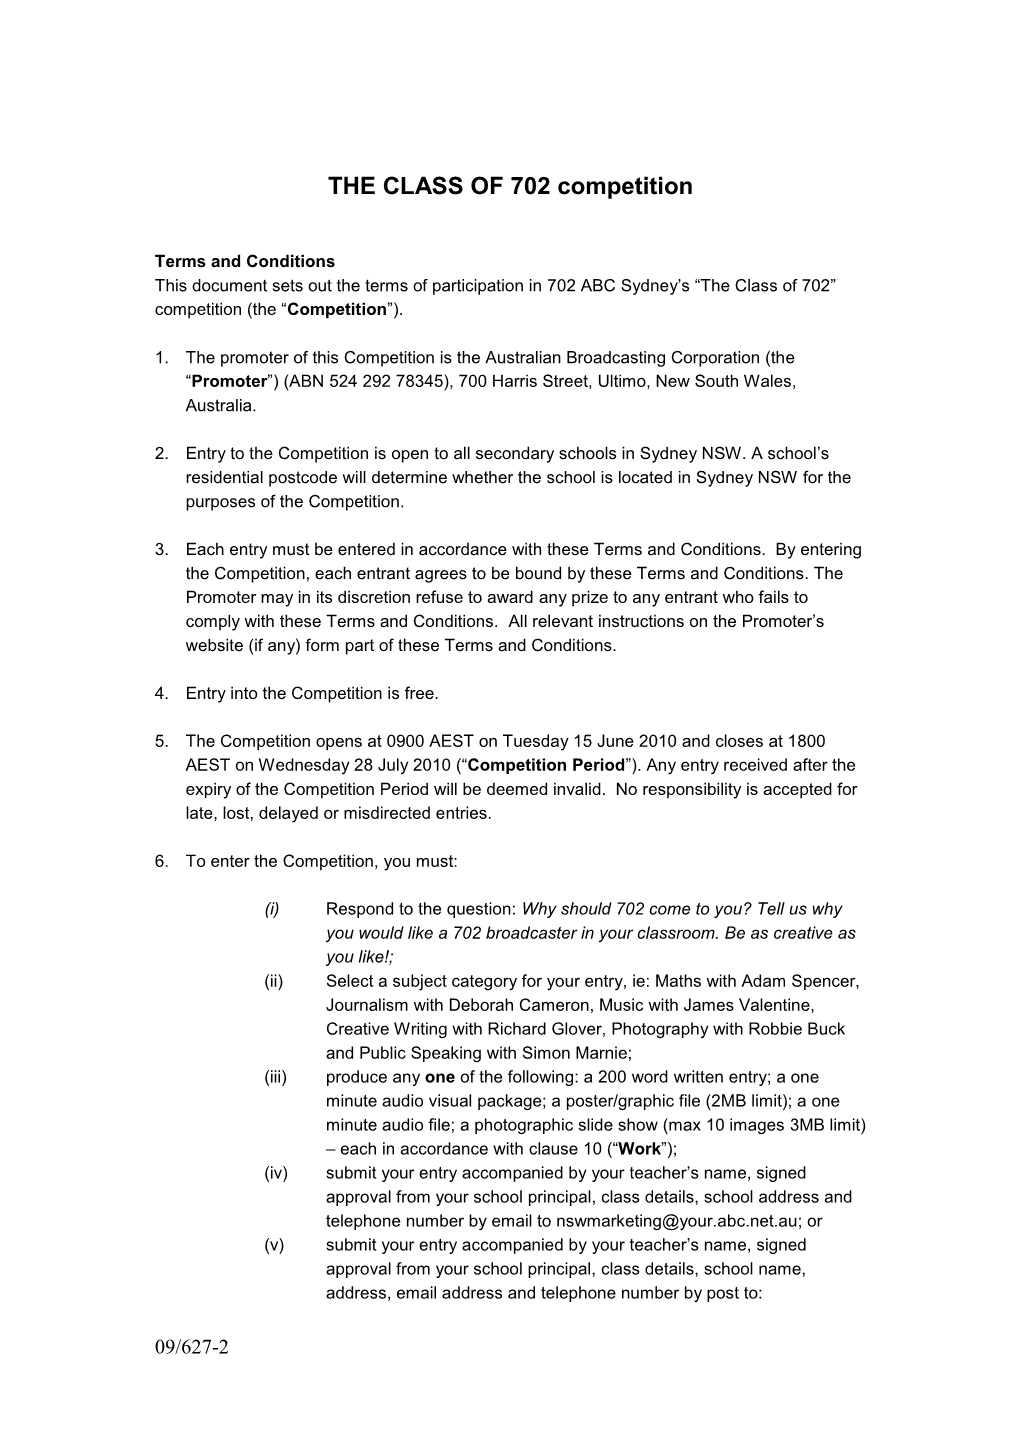 Terms and Conditions This Document Sets out the Terms of Participation in 702 ABC Sydney’S “The Class of 702” Competition (The “Competition”)